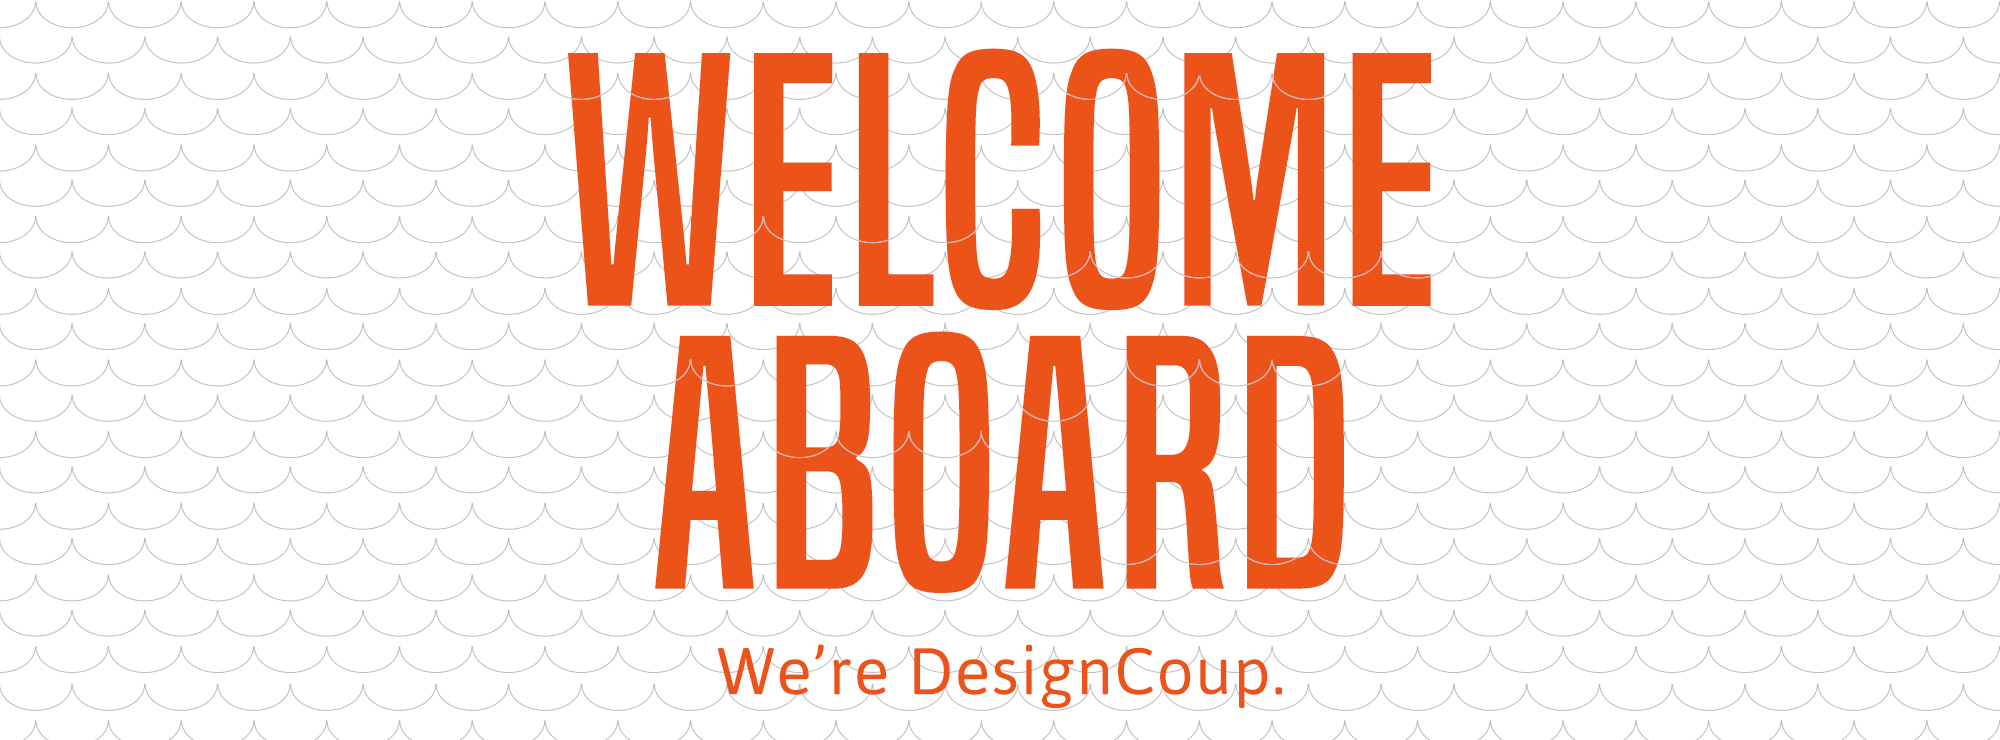 Welcome Aboard. We're DesignCoup